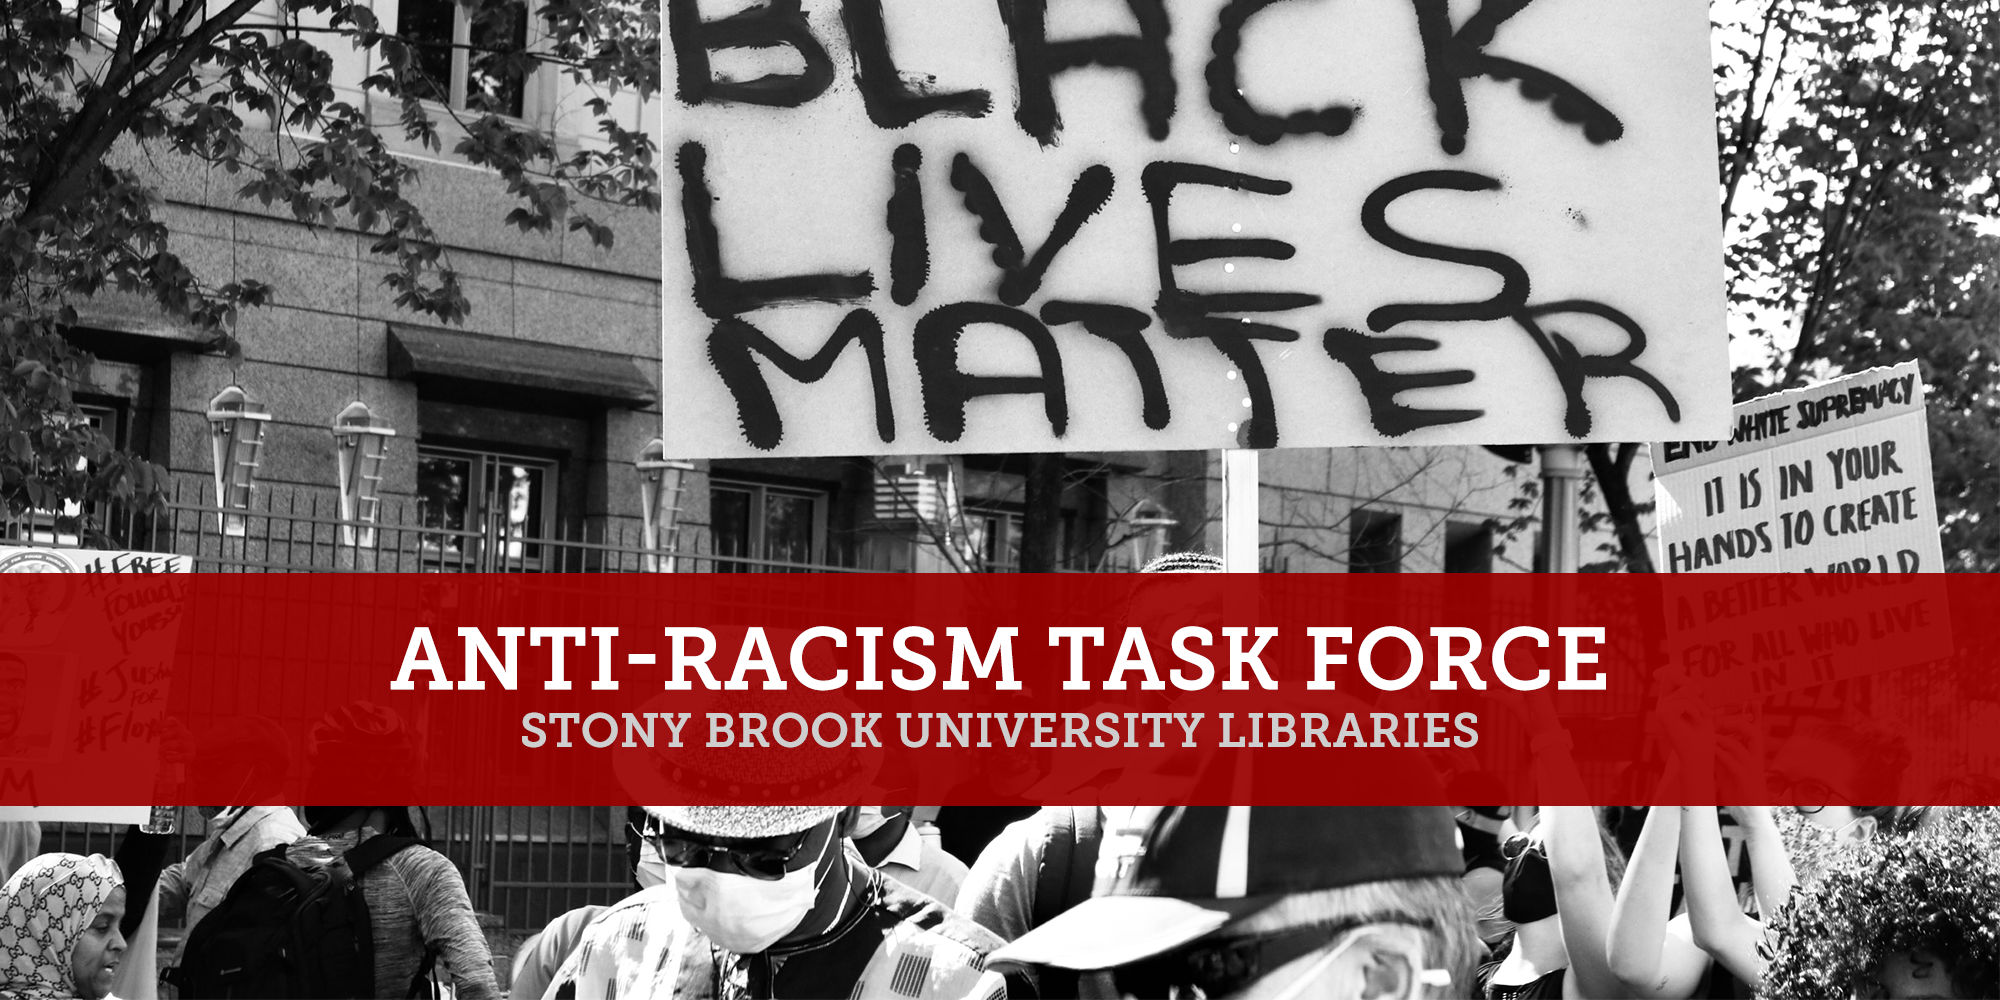 This image is a black and white photo of a crowd of protestors wearing face masks and holding signs. The main sign reads, Black Lives Matter. On top of this photo is a logo written in white font on a red banner that reads, Anti-Racism Task Force, Stony Brook University Libraries. The image links to the Stony Brook University Libraries Anti-Racism Task Force webpage.